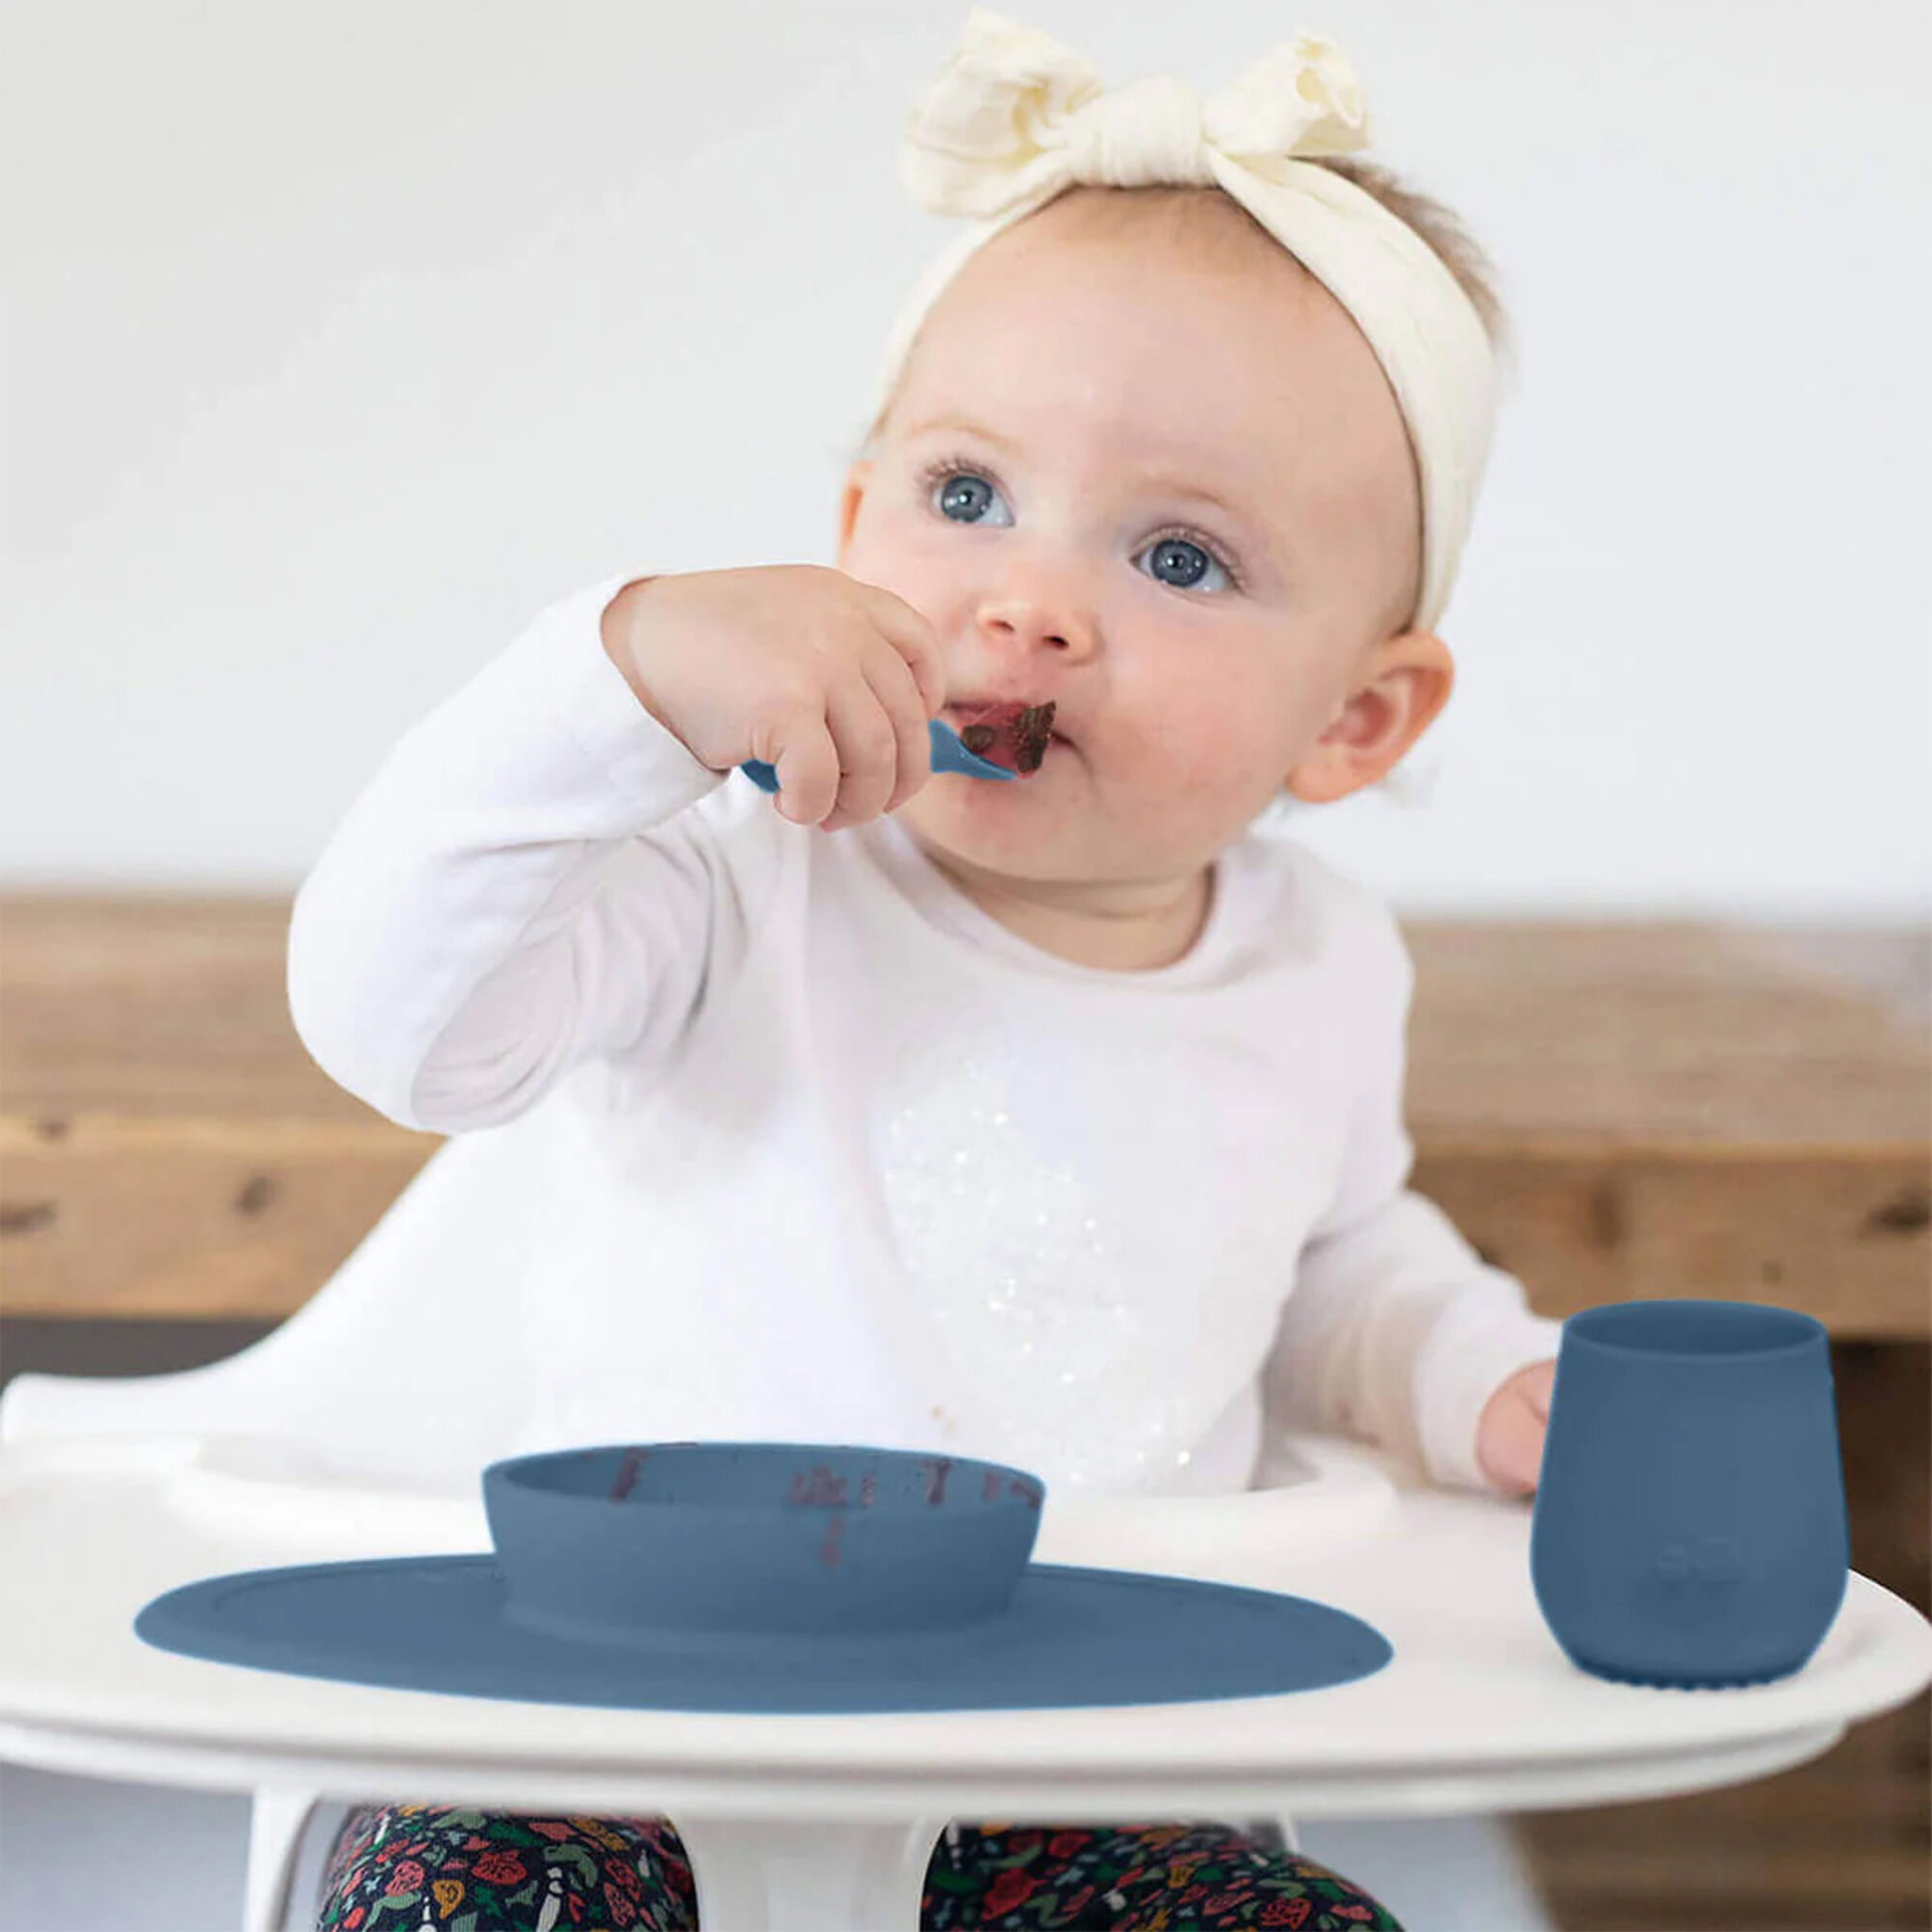 ez pz Tiny Cup (Gray) - 100% Silicone Training Cup for Infants - Designed  by a Pediatric Feeding Specialist - 4 months+ - Baby-led Weaning Gear &  Baby